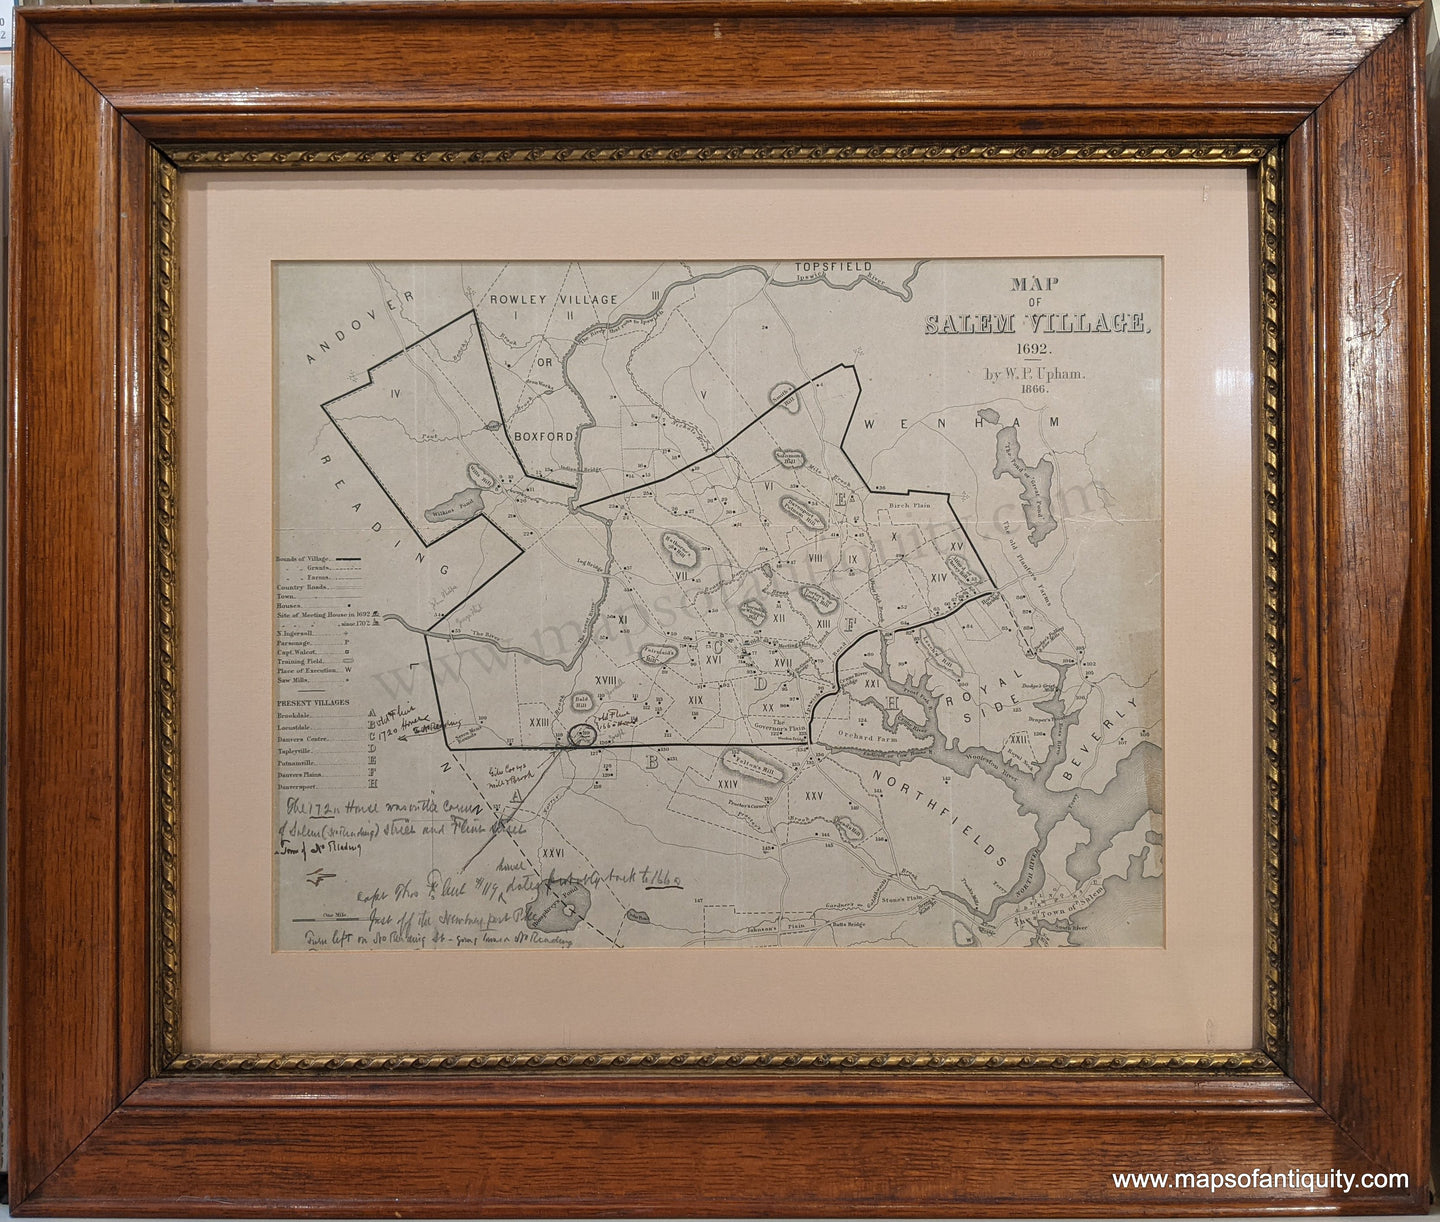 Genuine-Antique-Map-Framed-Map-of-Salem-Village-1692.-by-W.-P.-Upham-1866.-1866-Upham-Maps-Of-Antiquity-1800s-19th-century